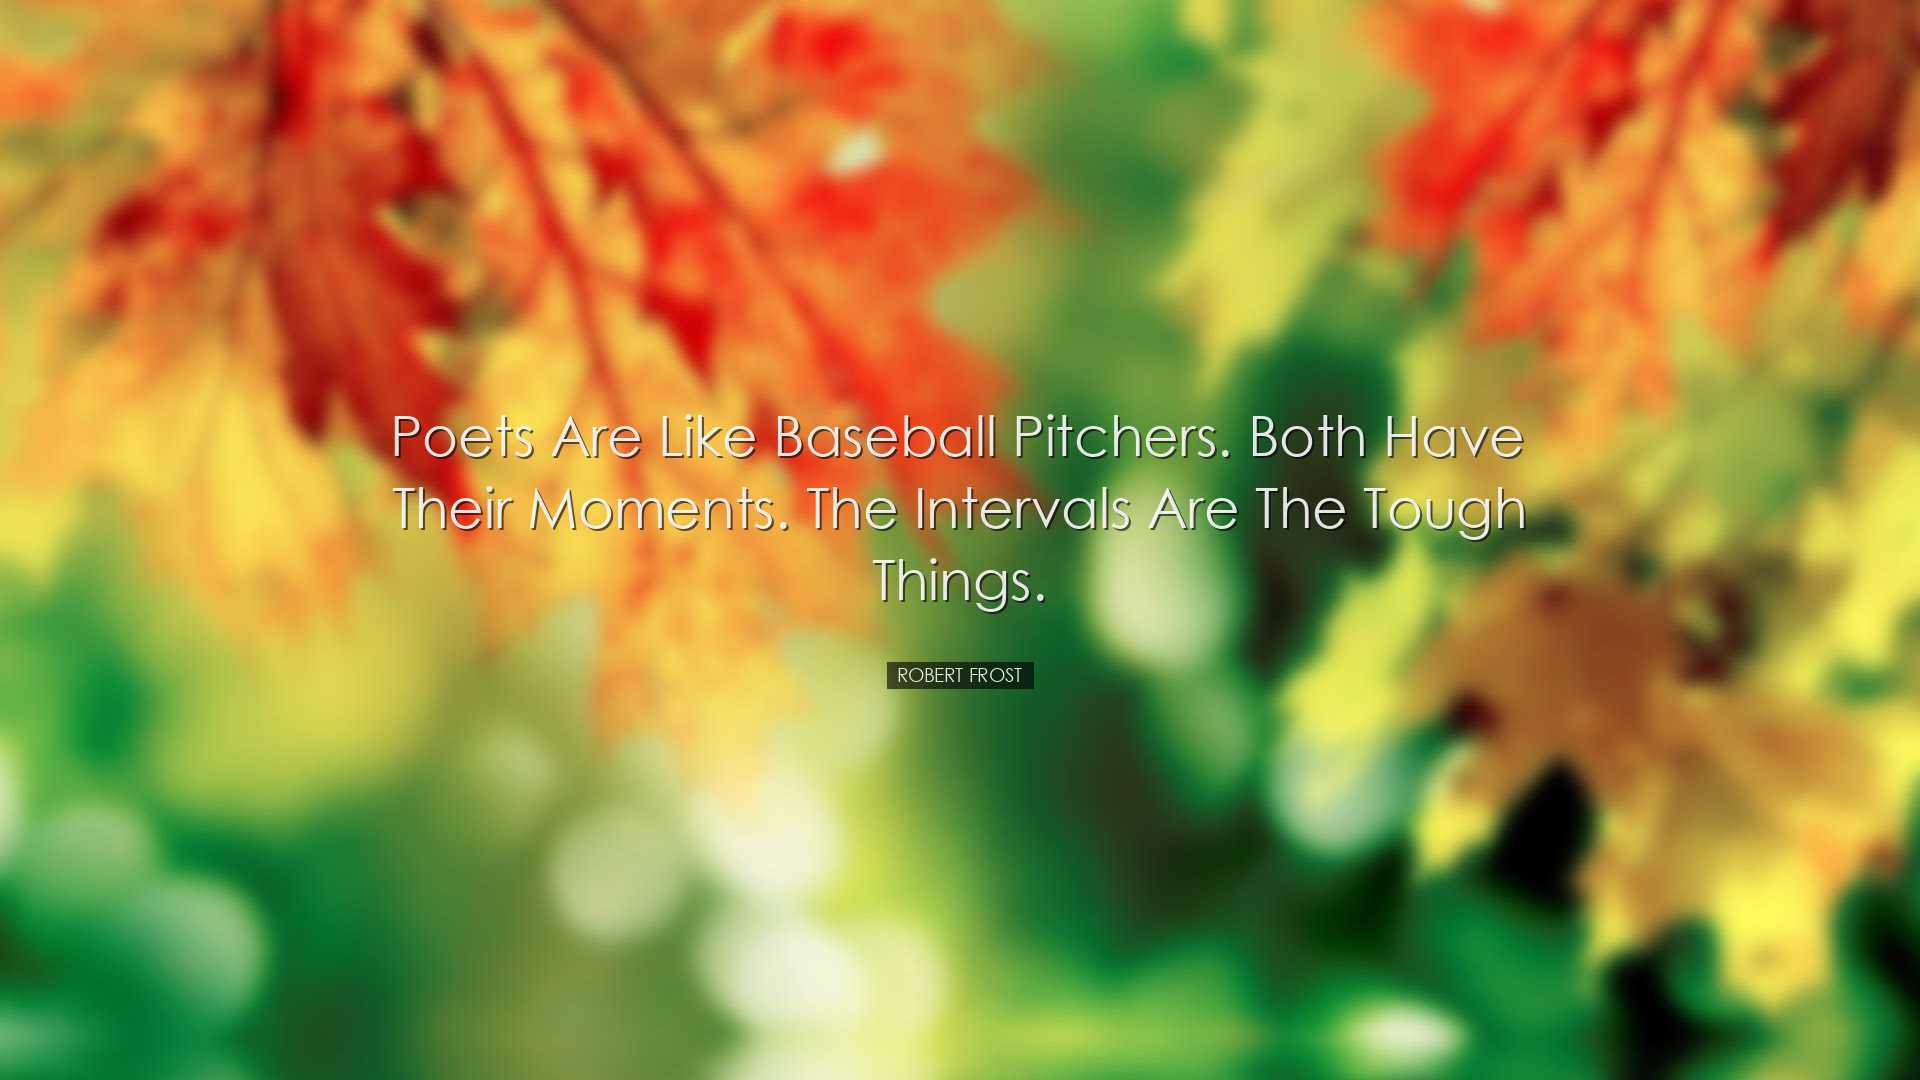 Poets are like baseball pitchers. Both have their moments. The int